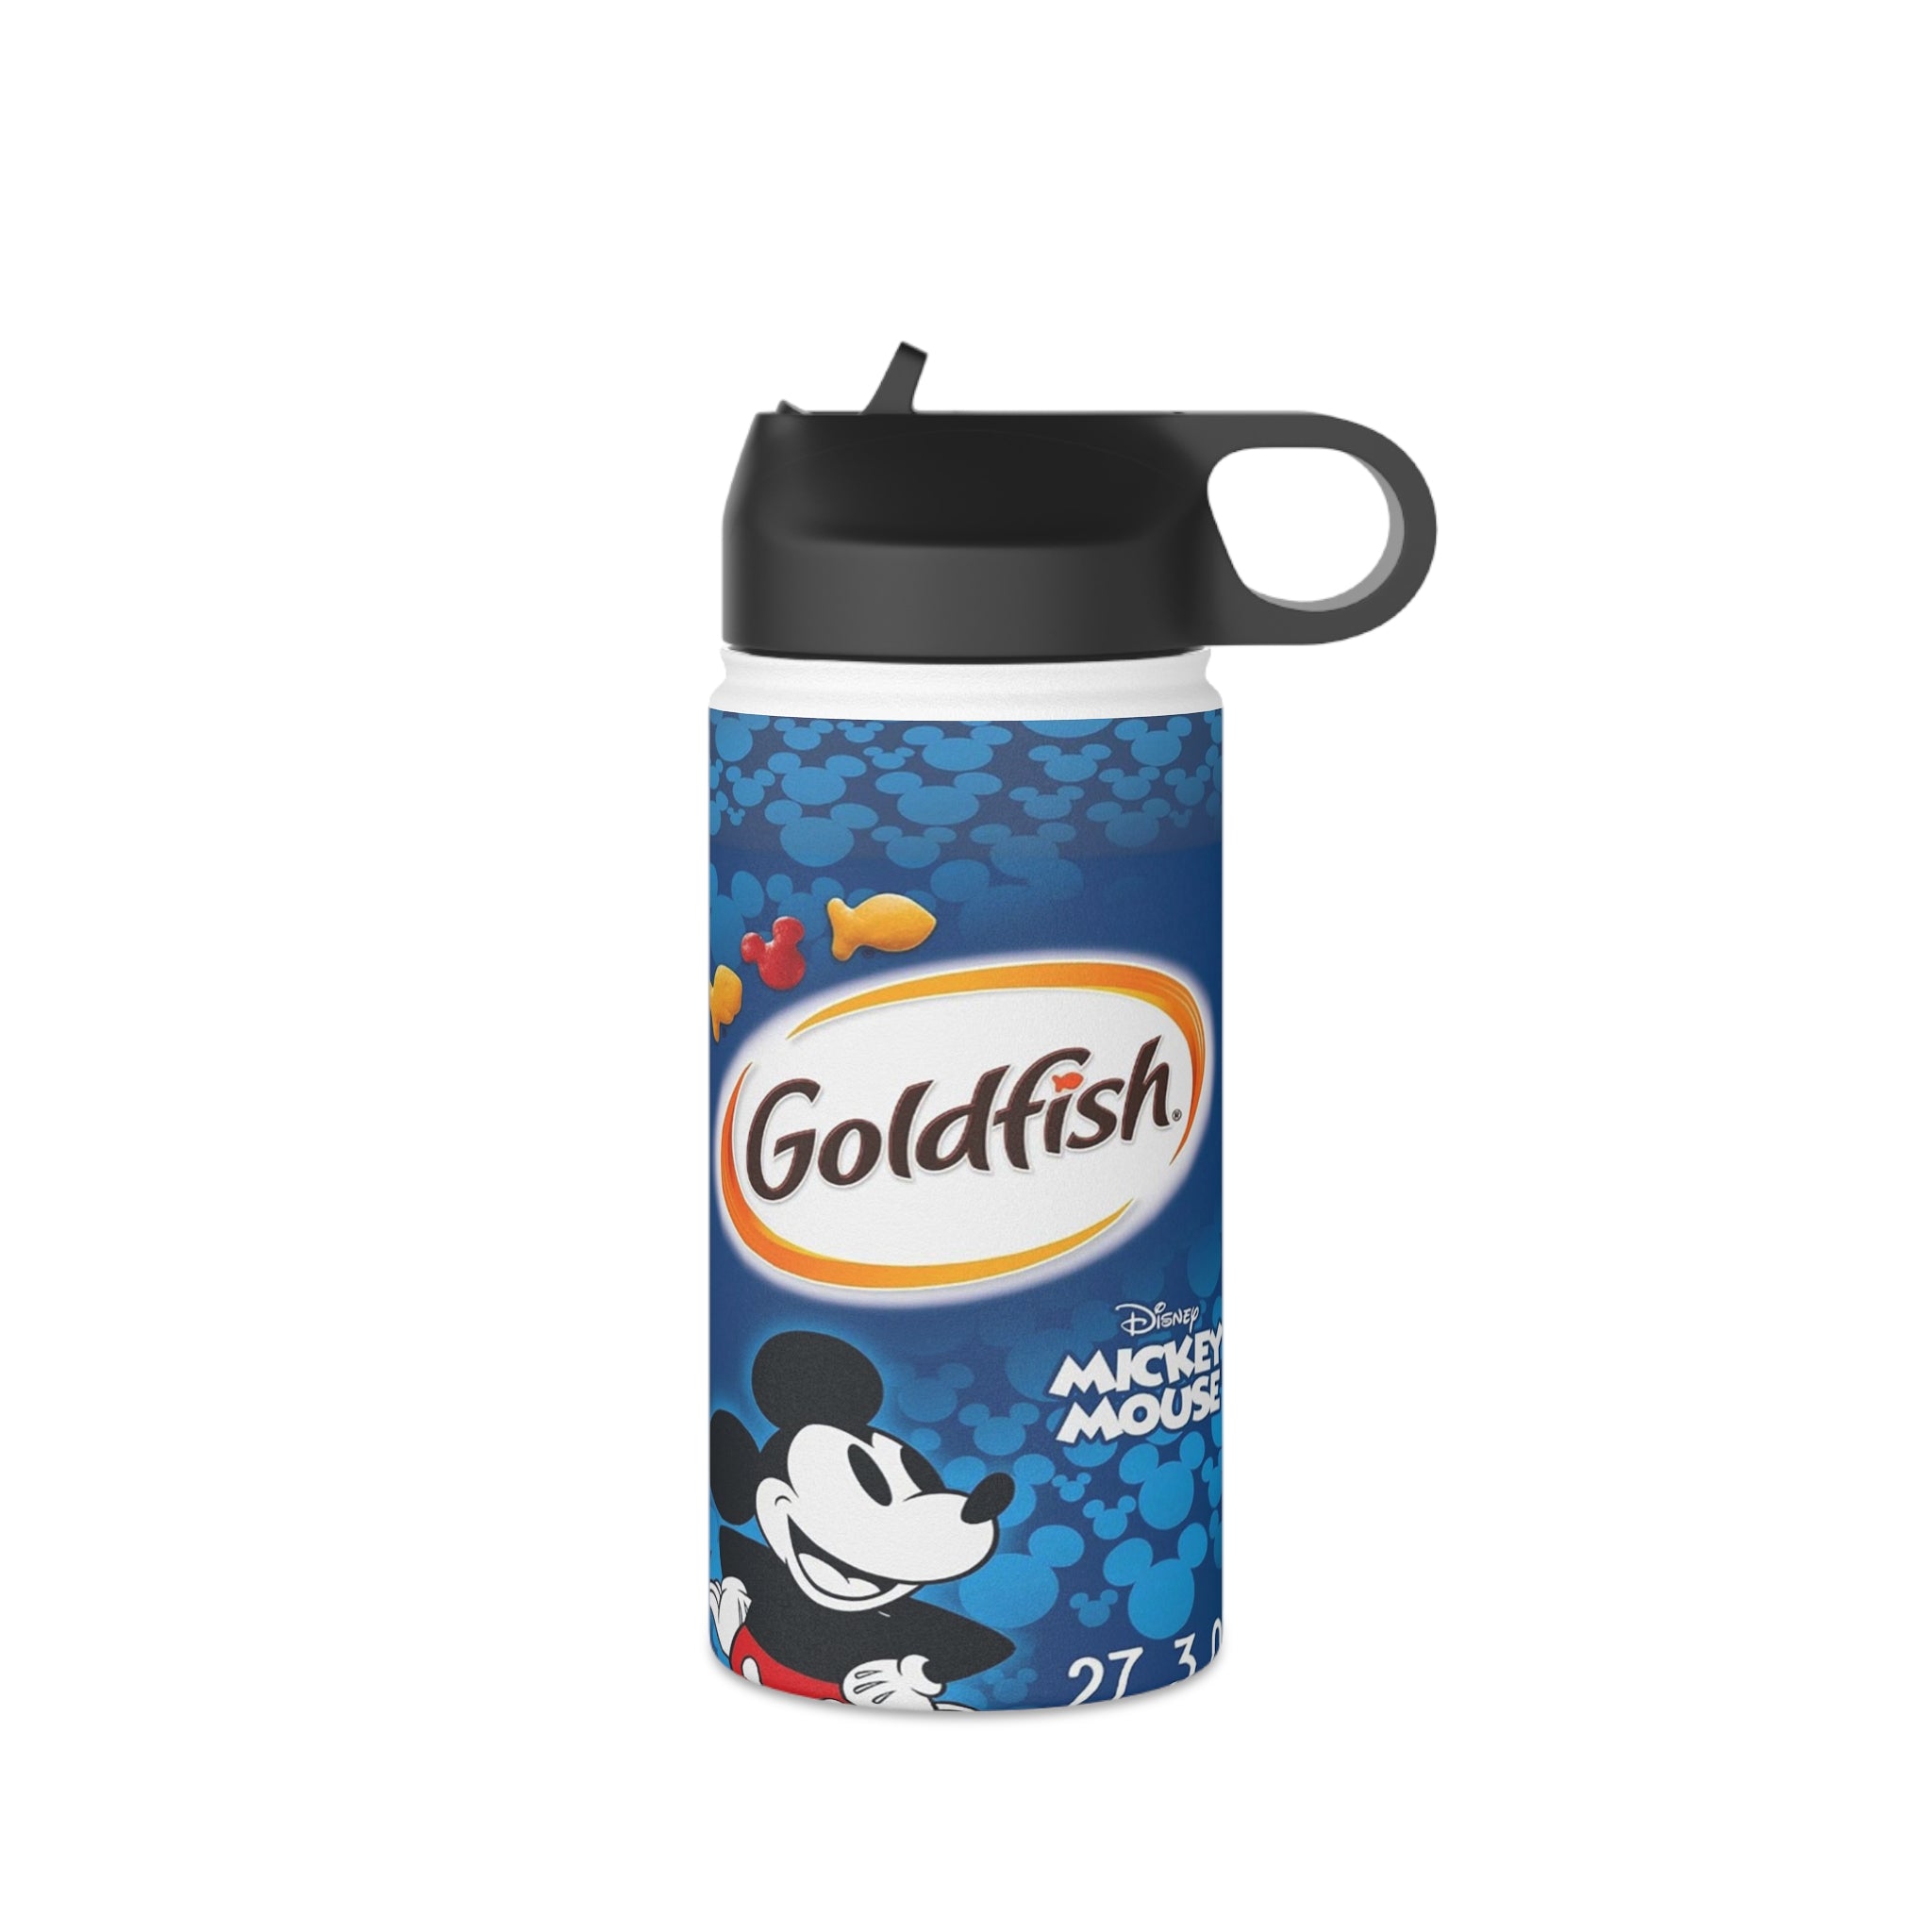 Goldfish Disney Mickey Mouse Cheddar Stainless Steel Water Bottle, Standard Lid